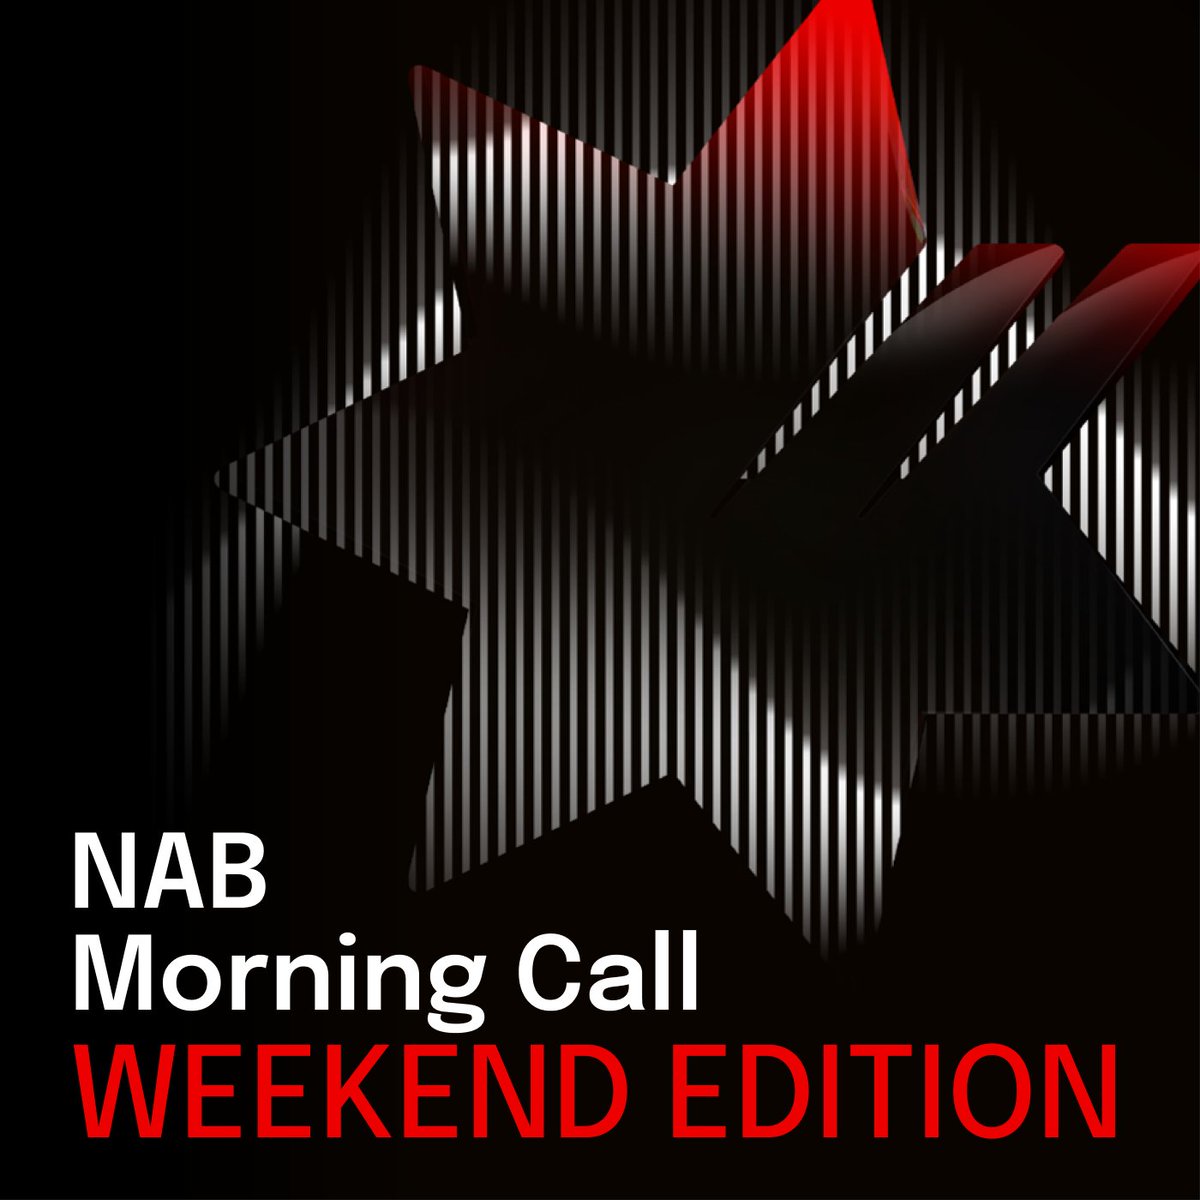 NVIDIA shares up 75% so far this year. Can these megacaps continue to deliver? @stocktonkatie on The NAB Weekend Edition talks about the importance of momentum and says they, and other tech leaders, have it! shows.acast.com/morningcall/th…